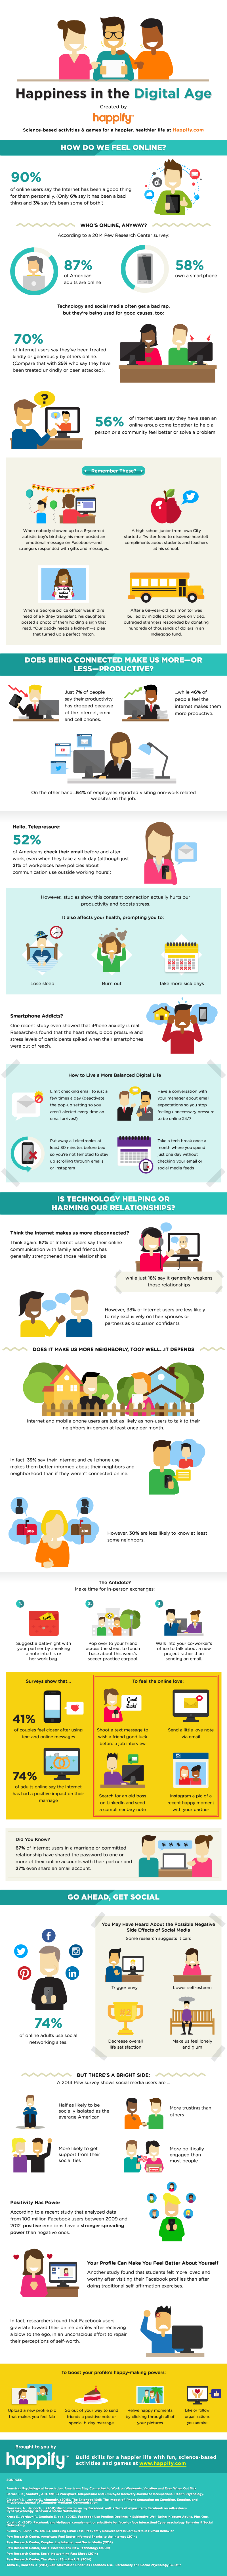 Happiness in the Digital Age - #infographic